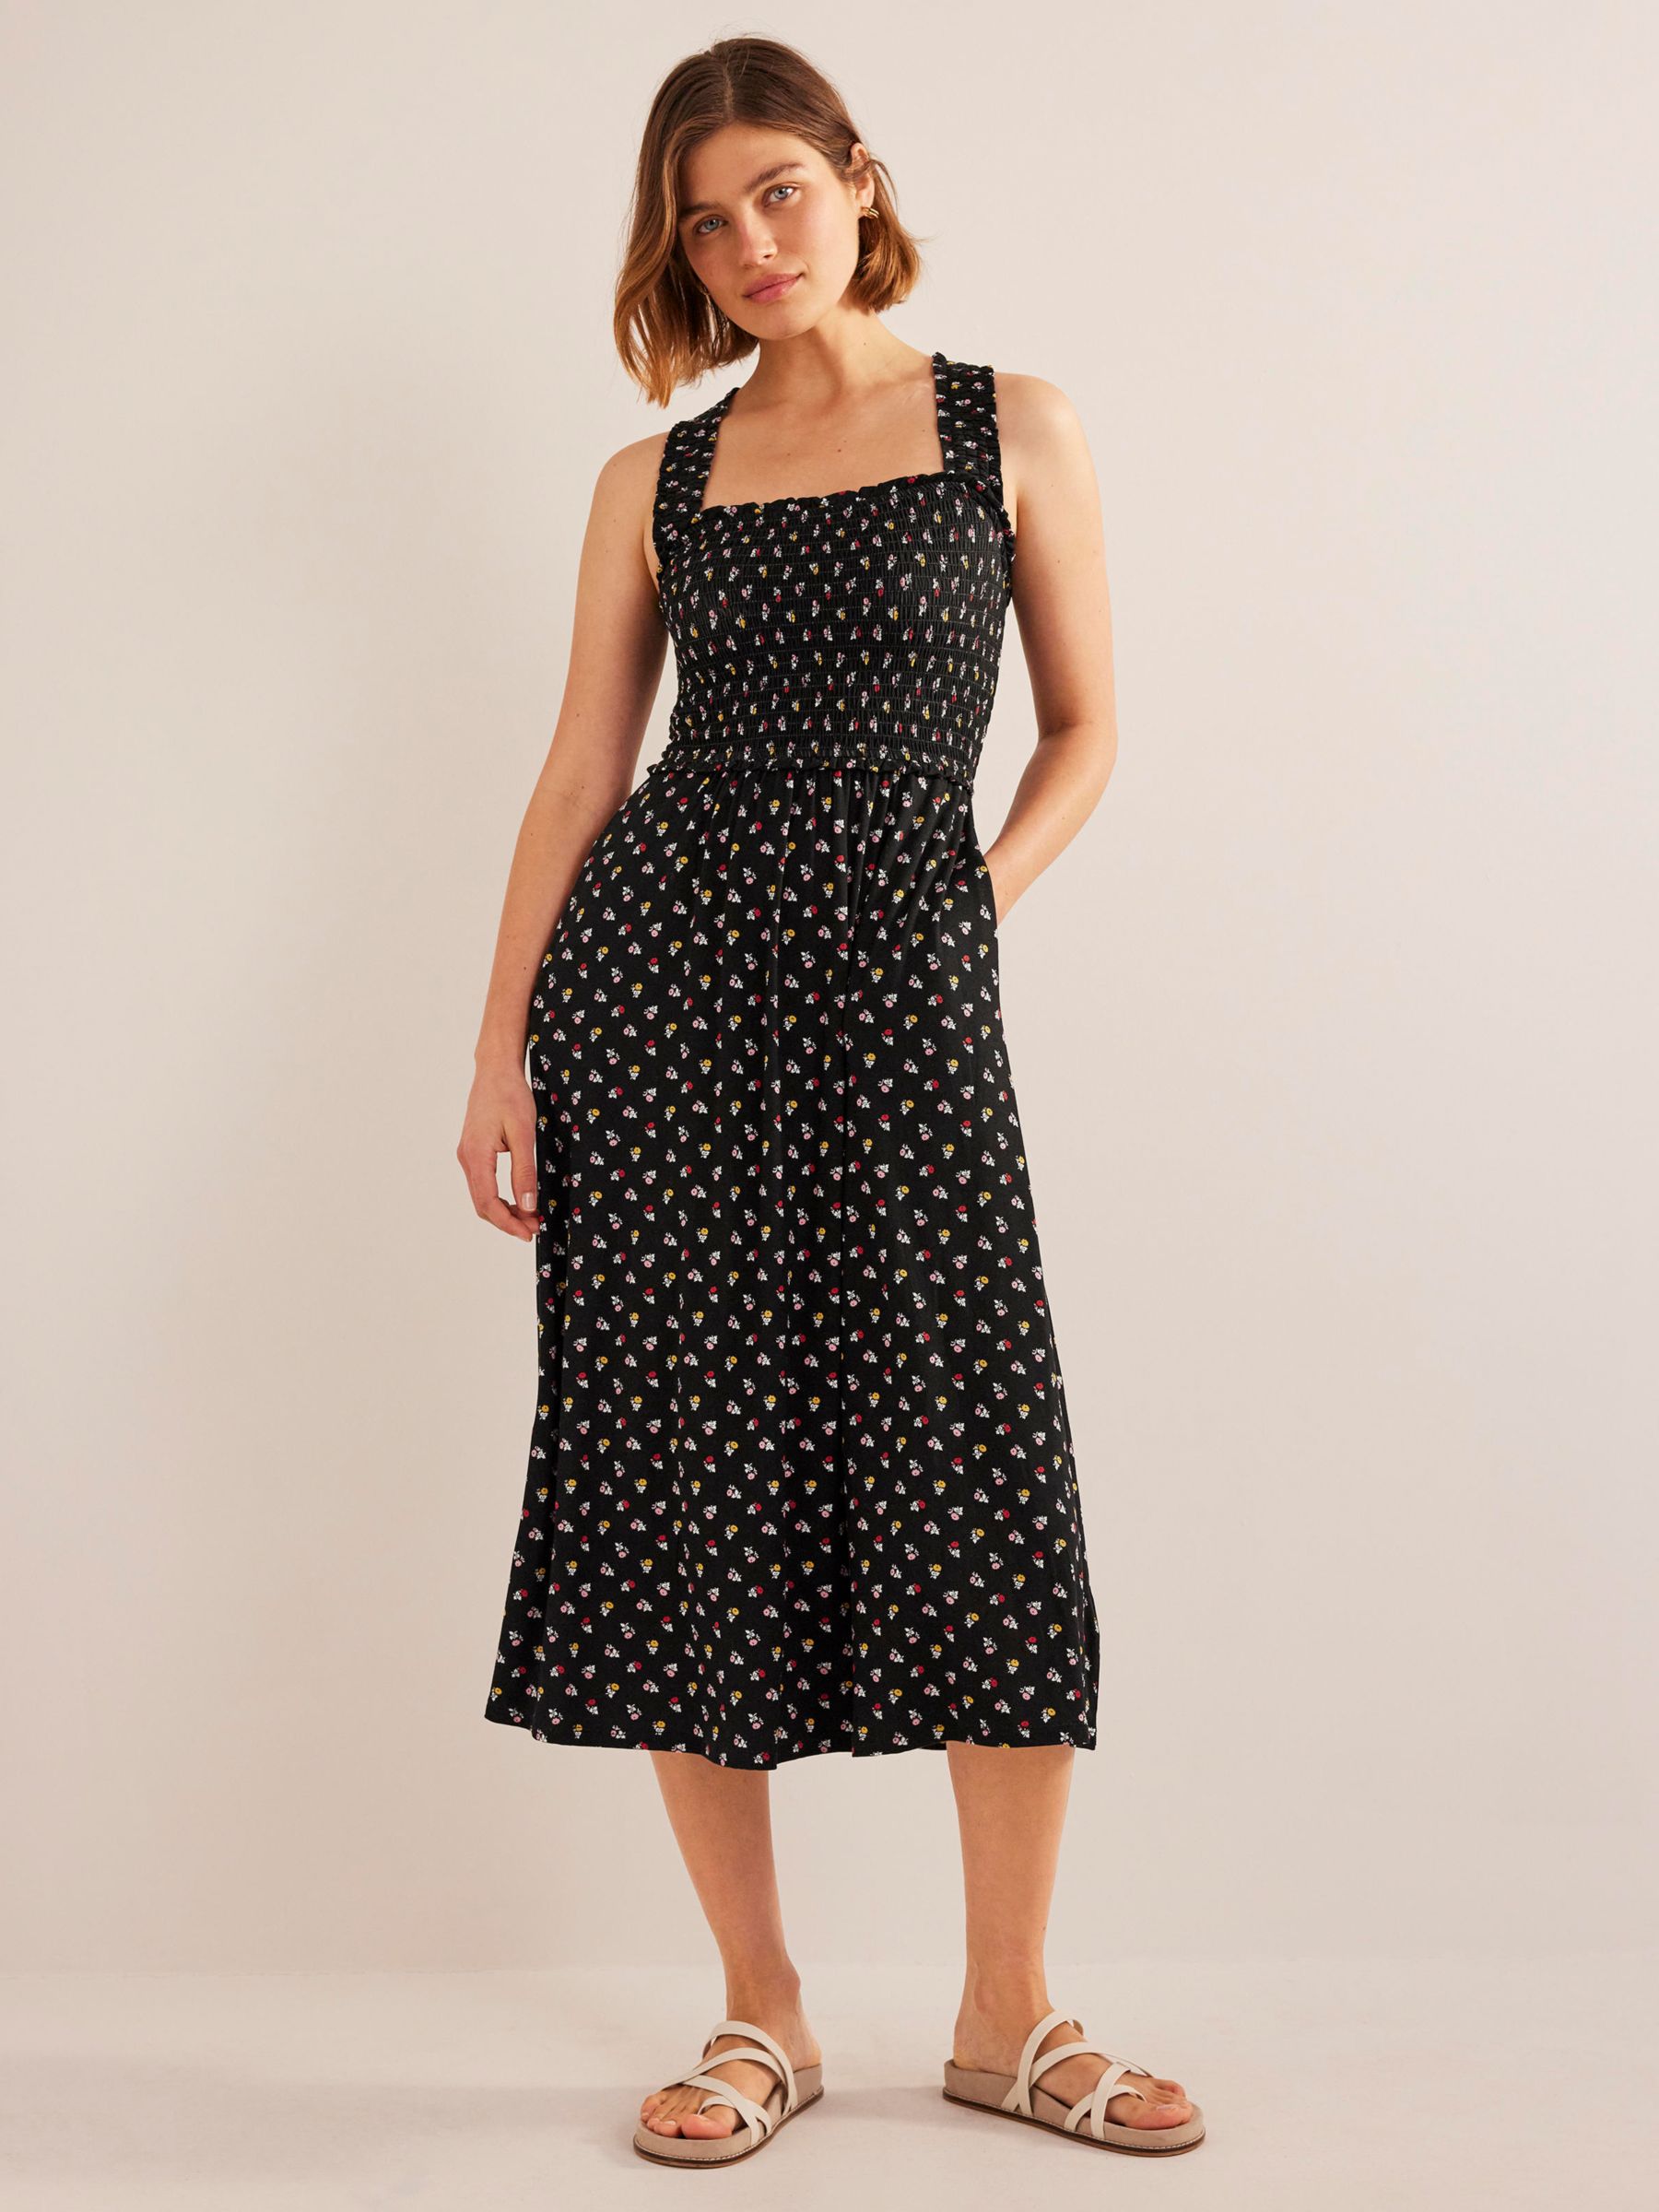 Dresses For 50 Year Olds | John Lewis & Partners